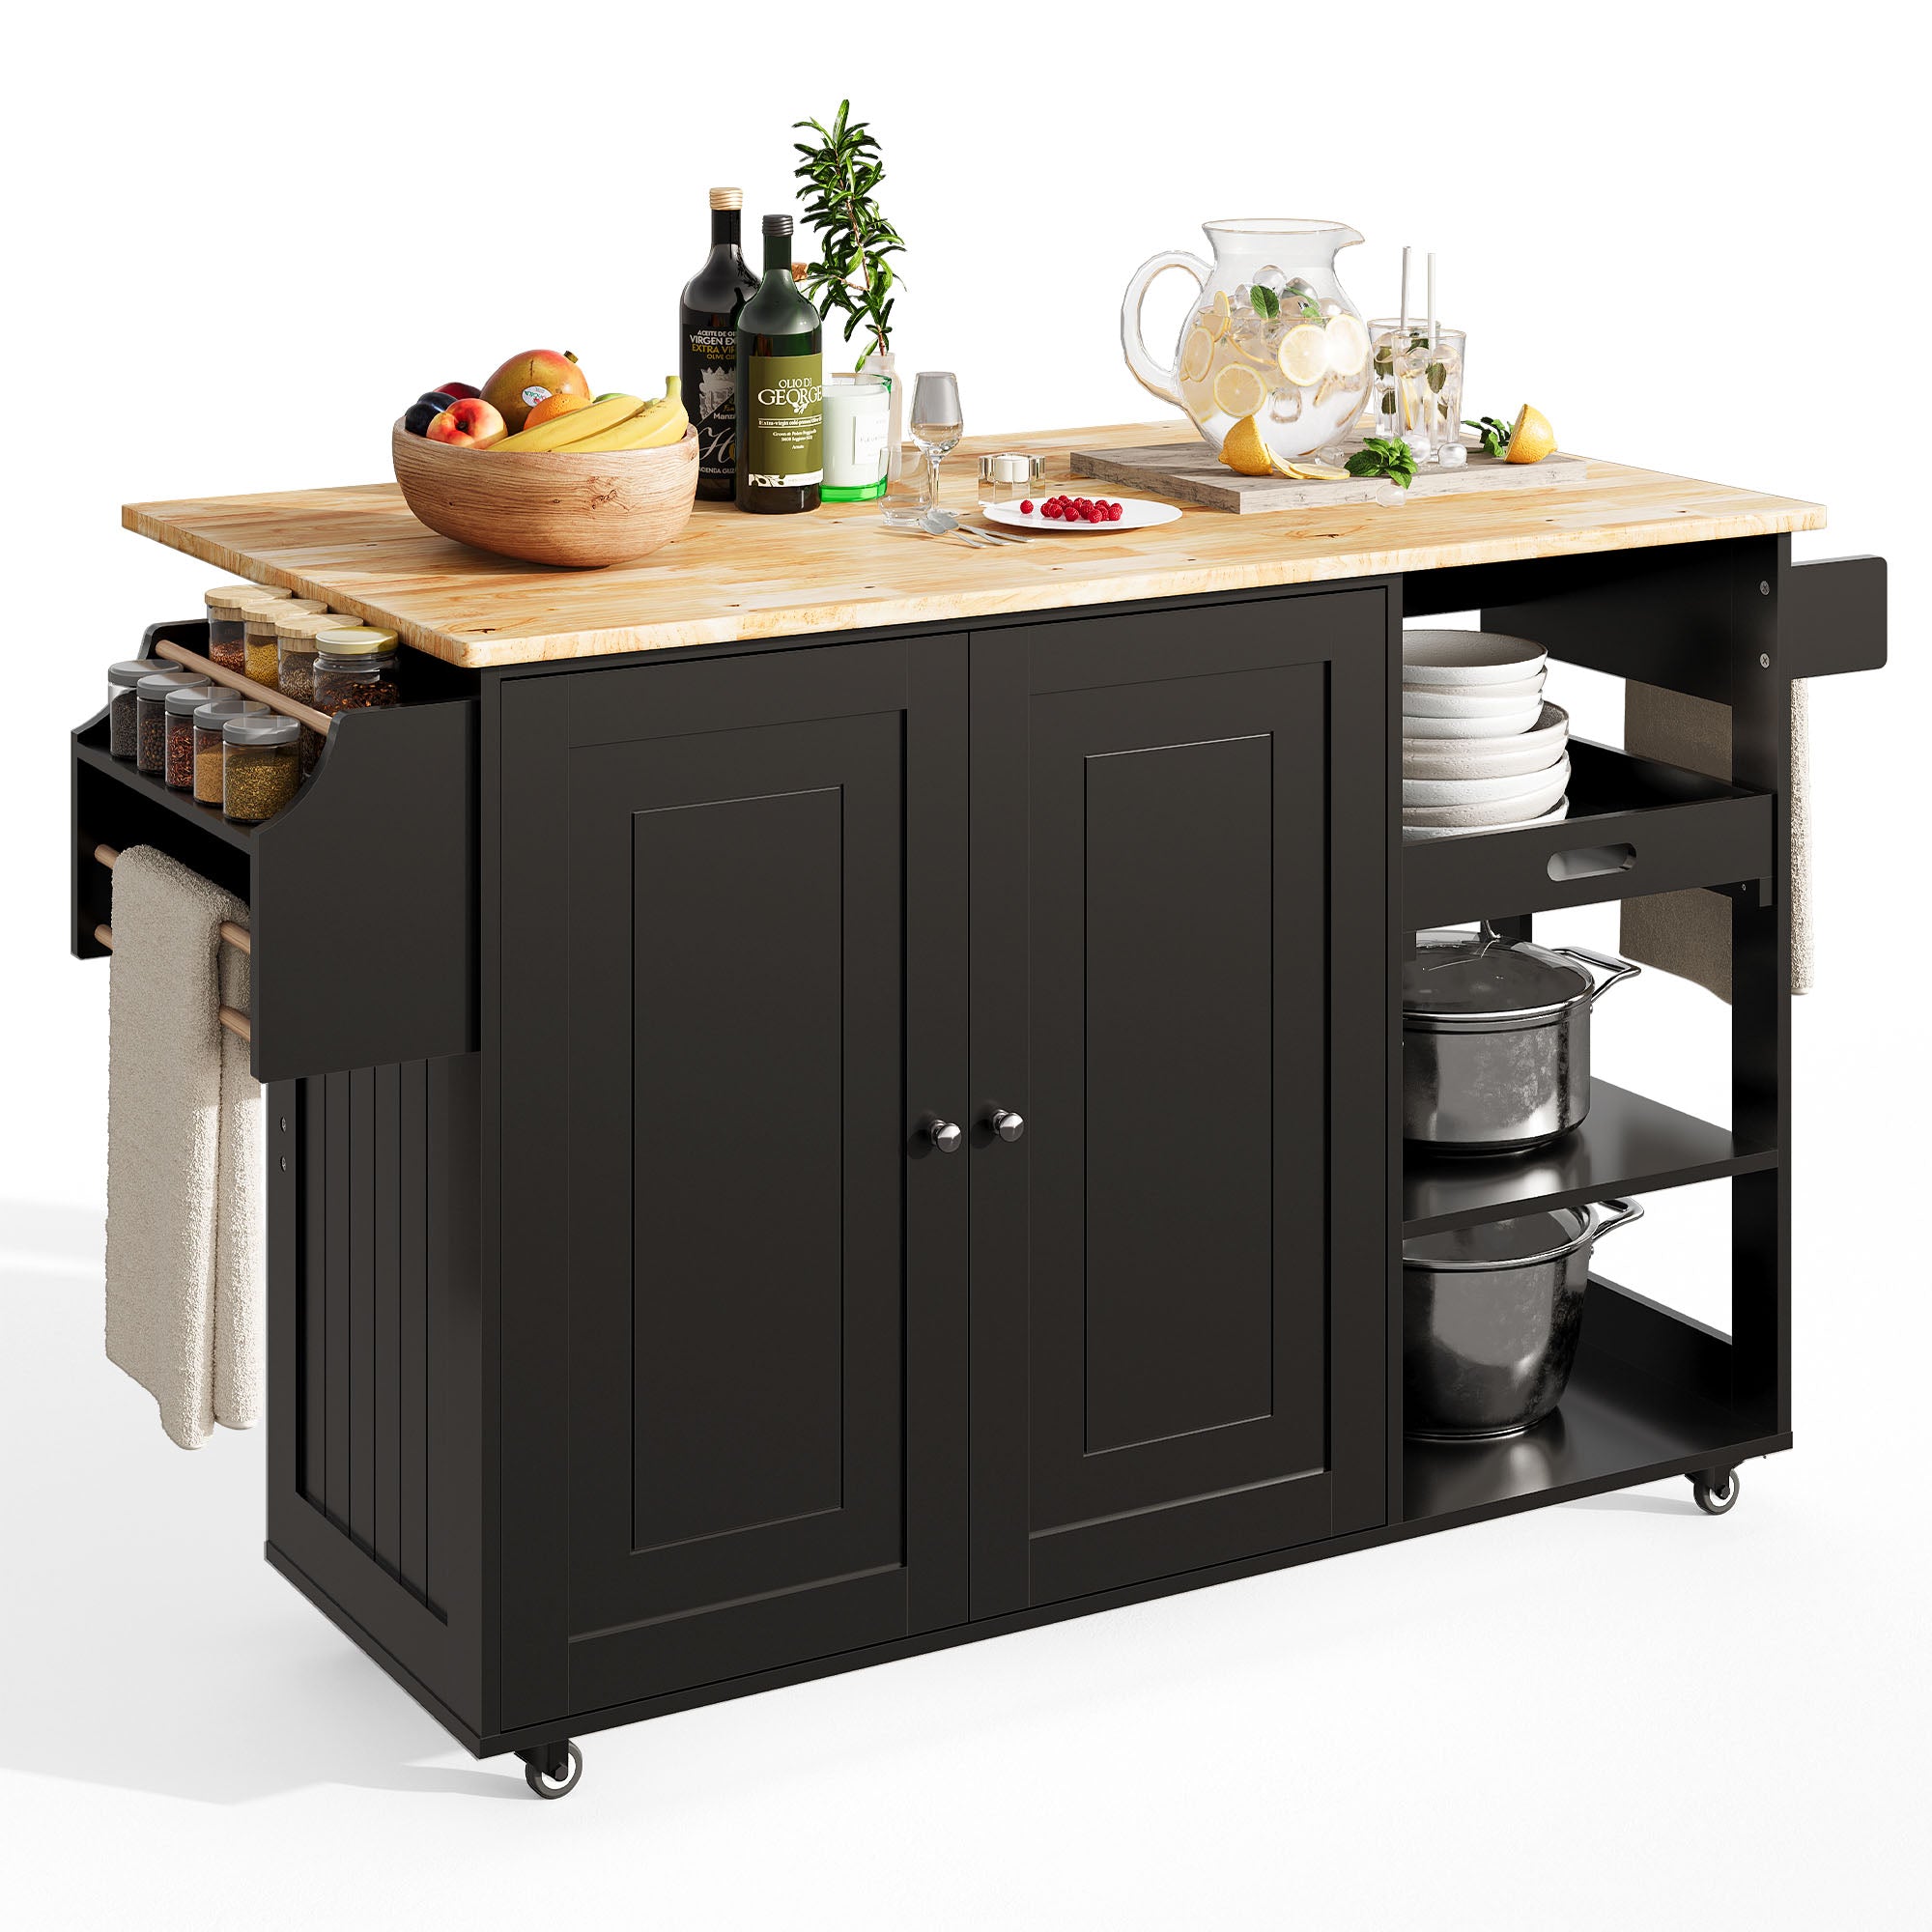 Gizoon KC70 51" Rolling Kitchen Island with Drop Leaf and Adjustable Shelf